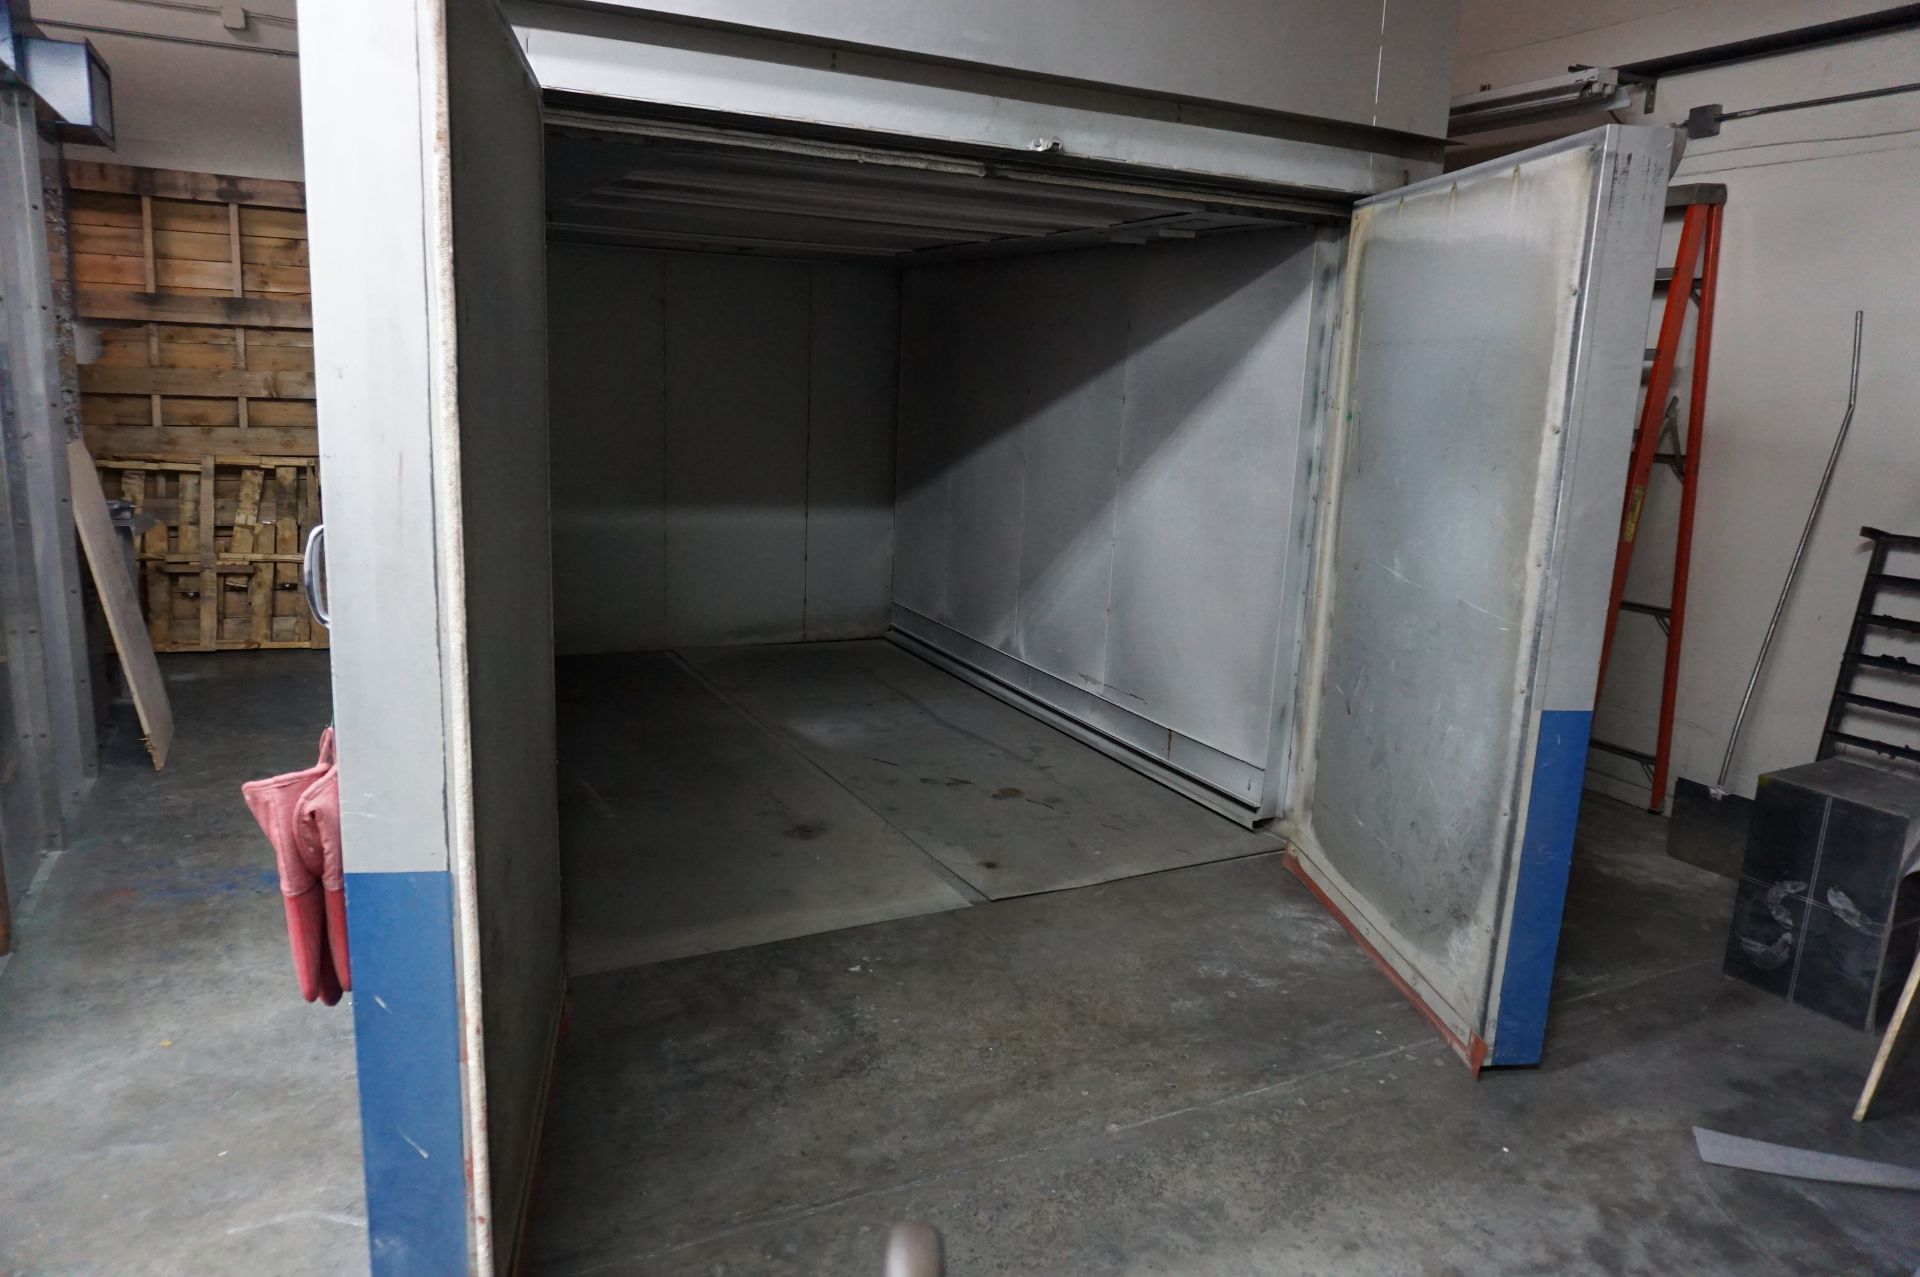 HEAT TREAT WALK IN FURNACE FOR POWDER COATING, DIMENSONS AREA 12' X 9' X 83"H, DUNGS FURNACE GAS - Image 2 of 13